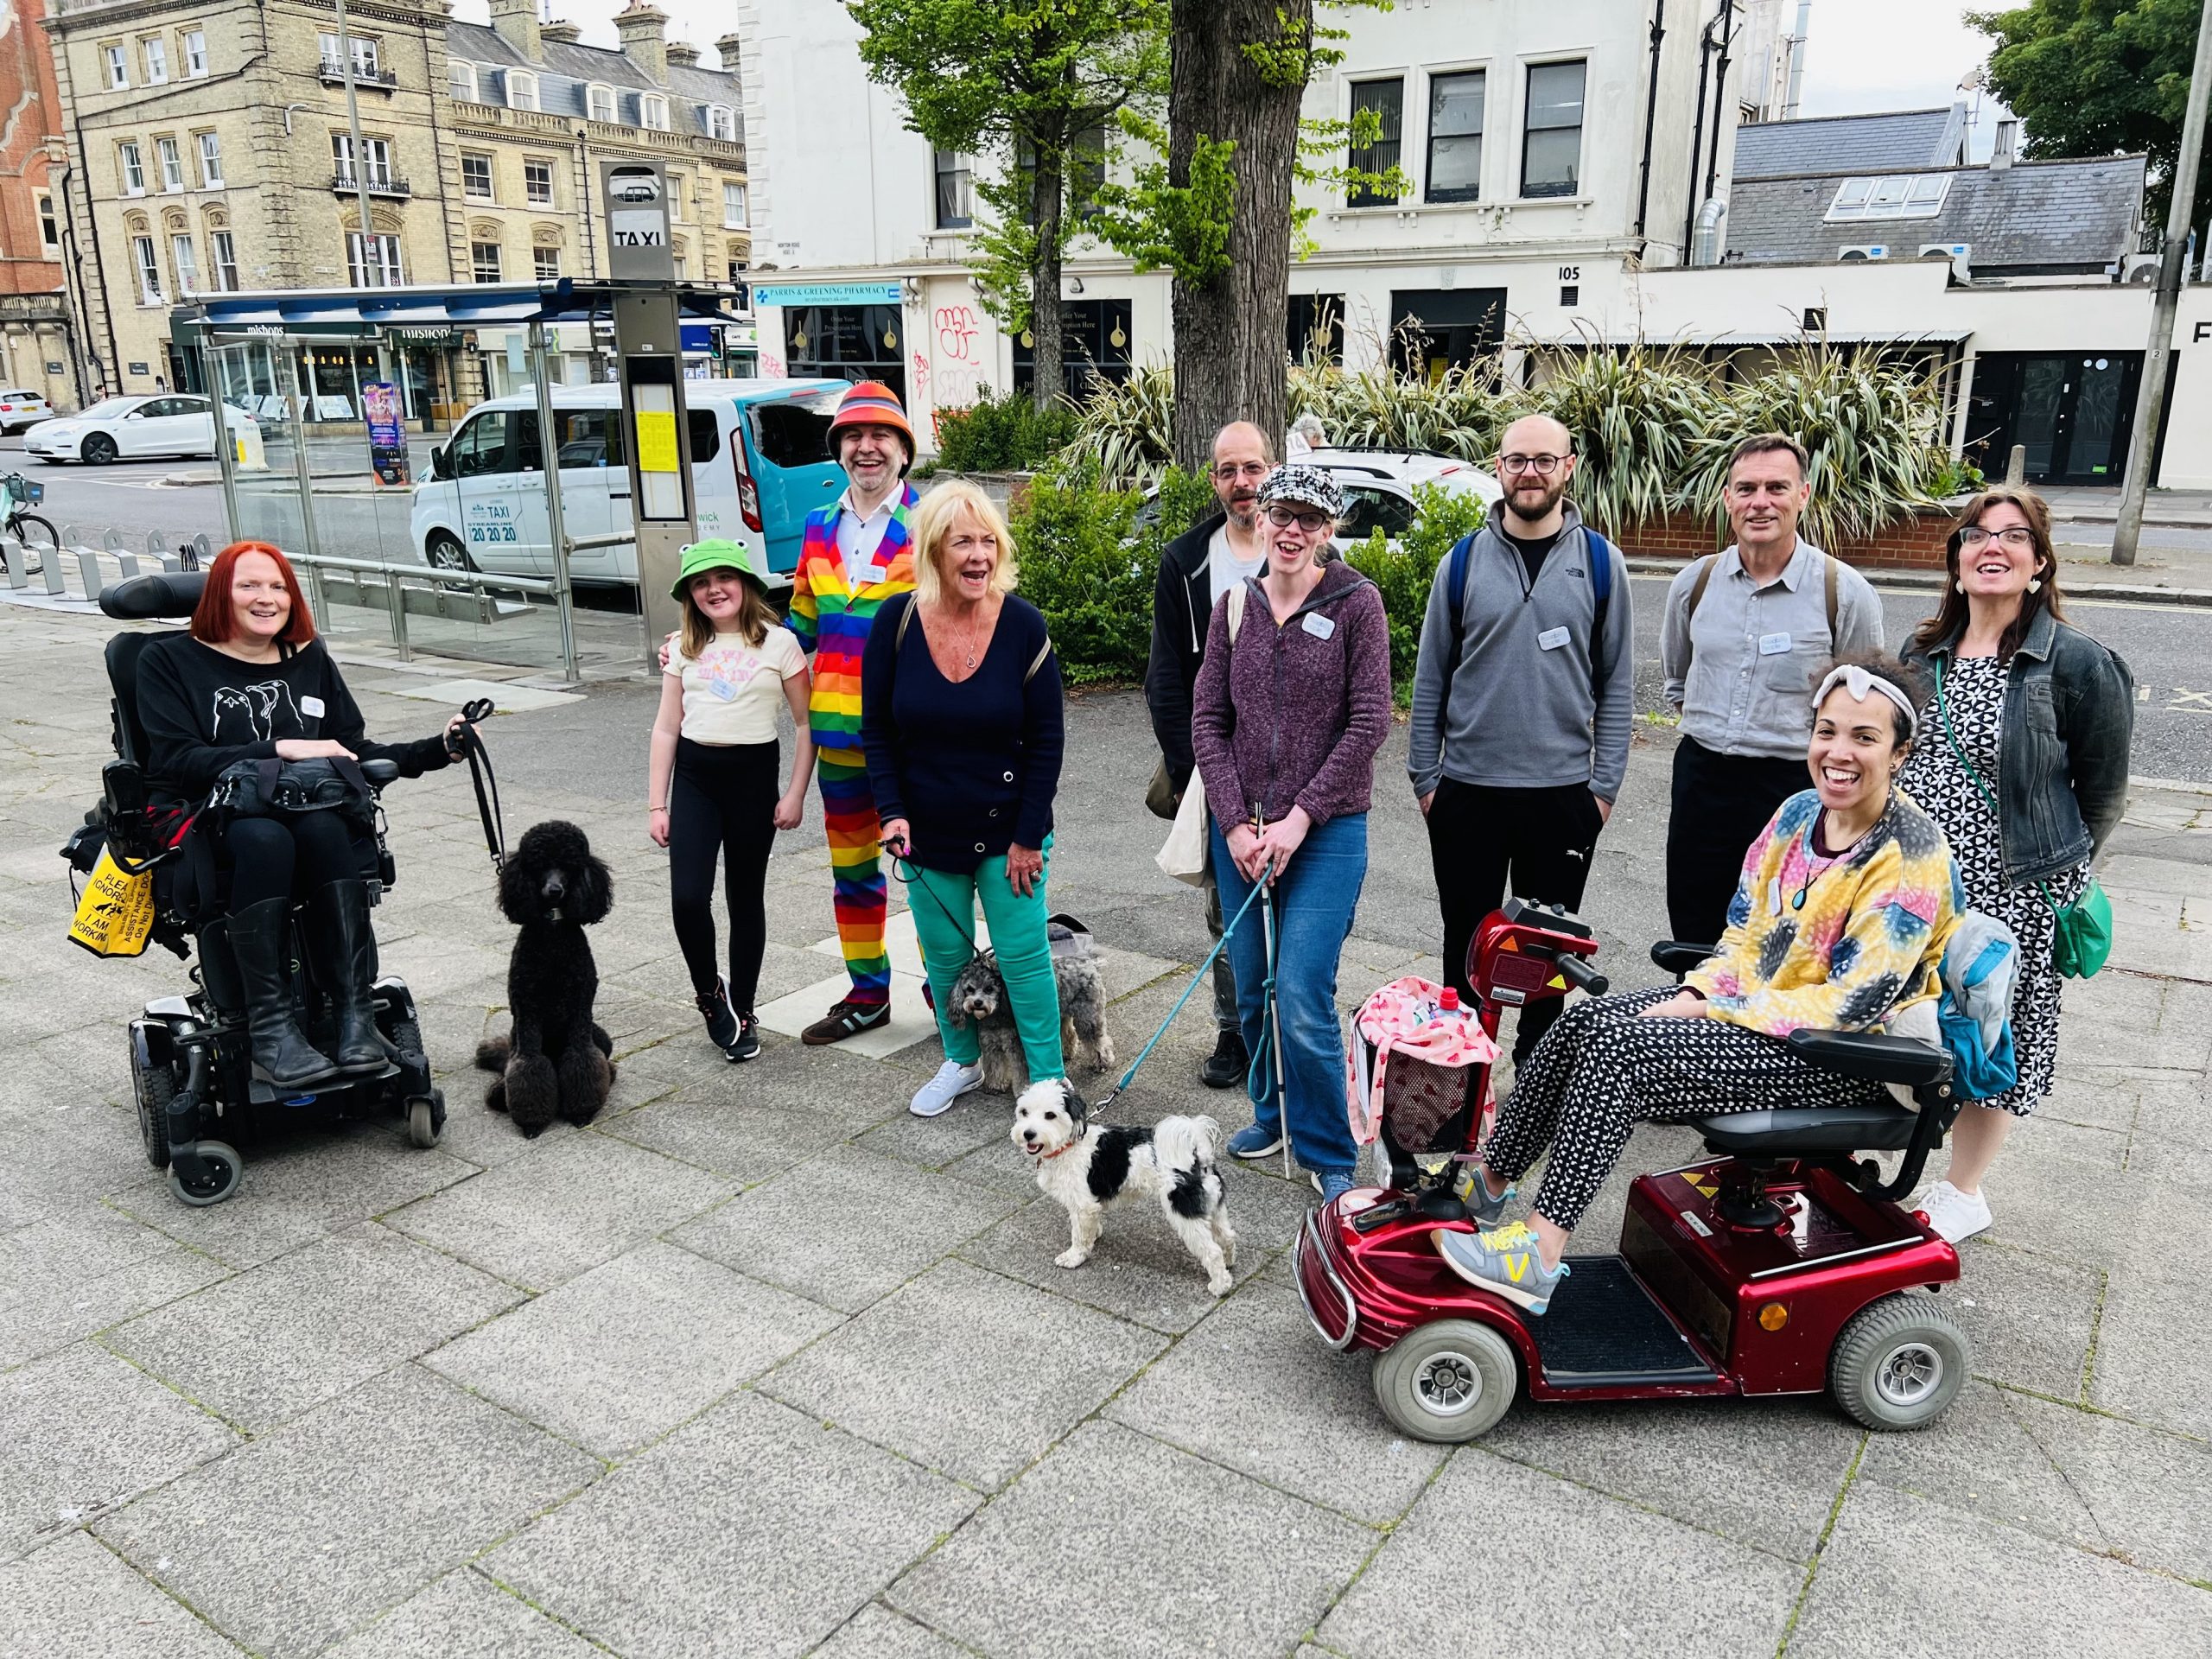 Group of people, including two wheelchair users, gathered together